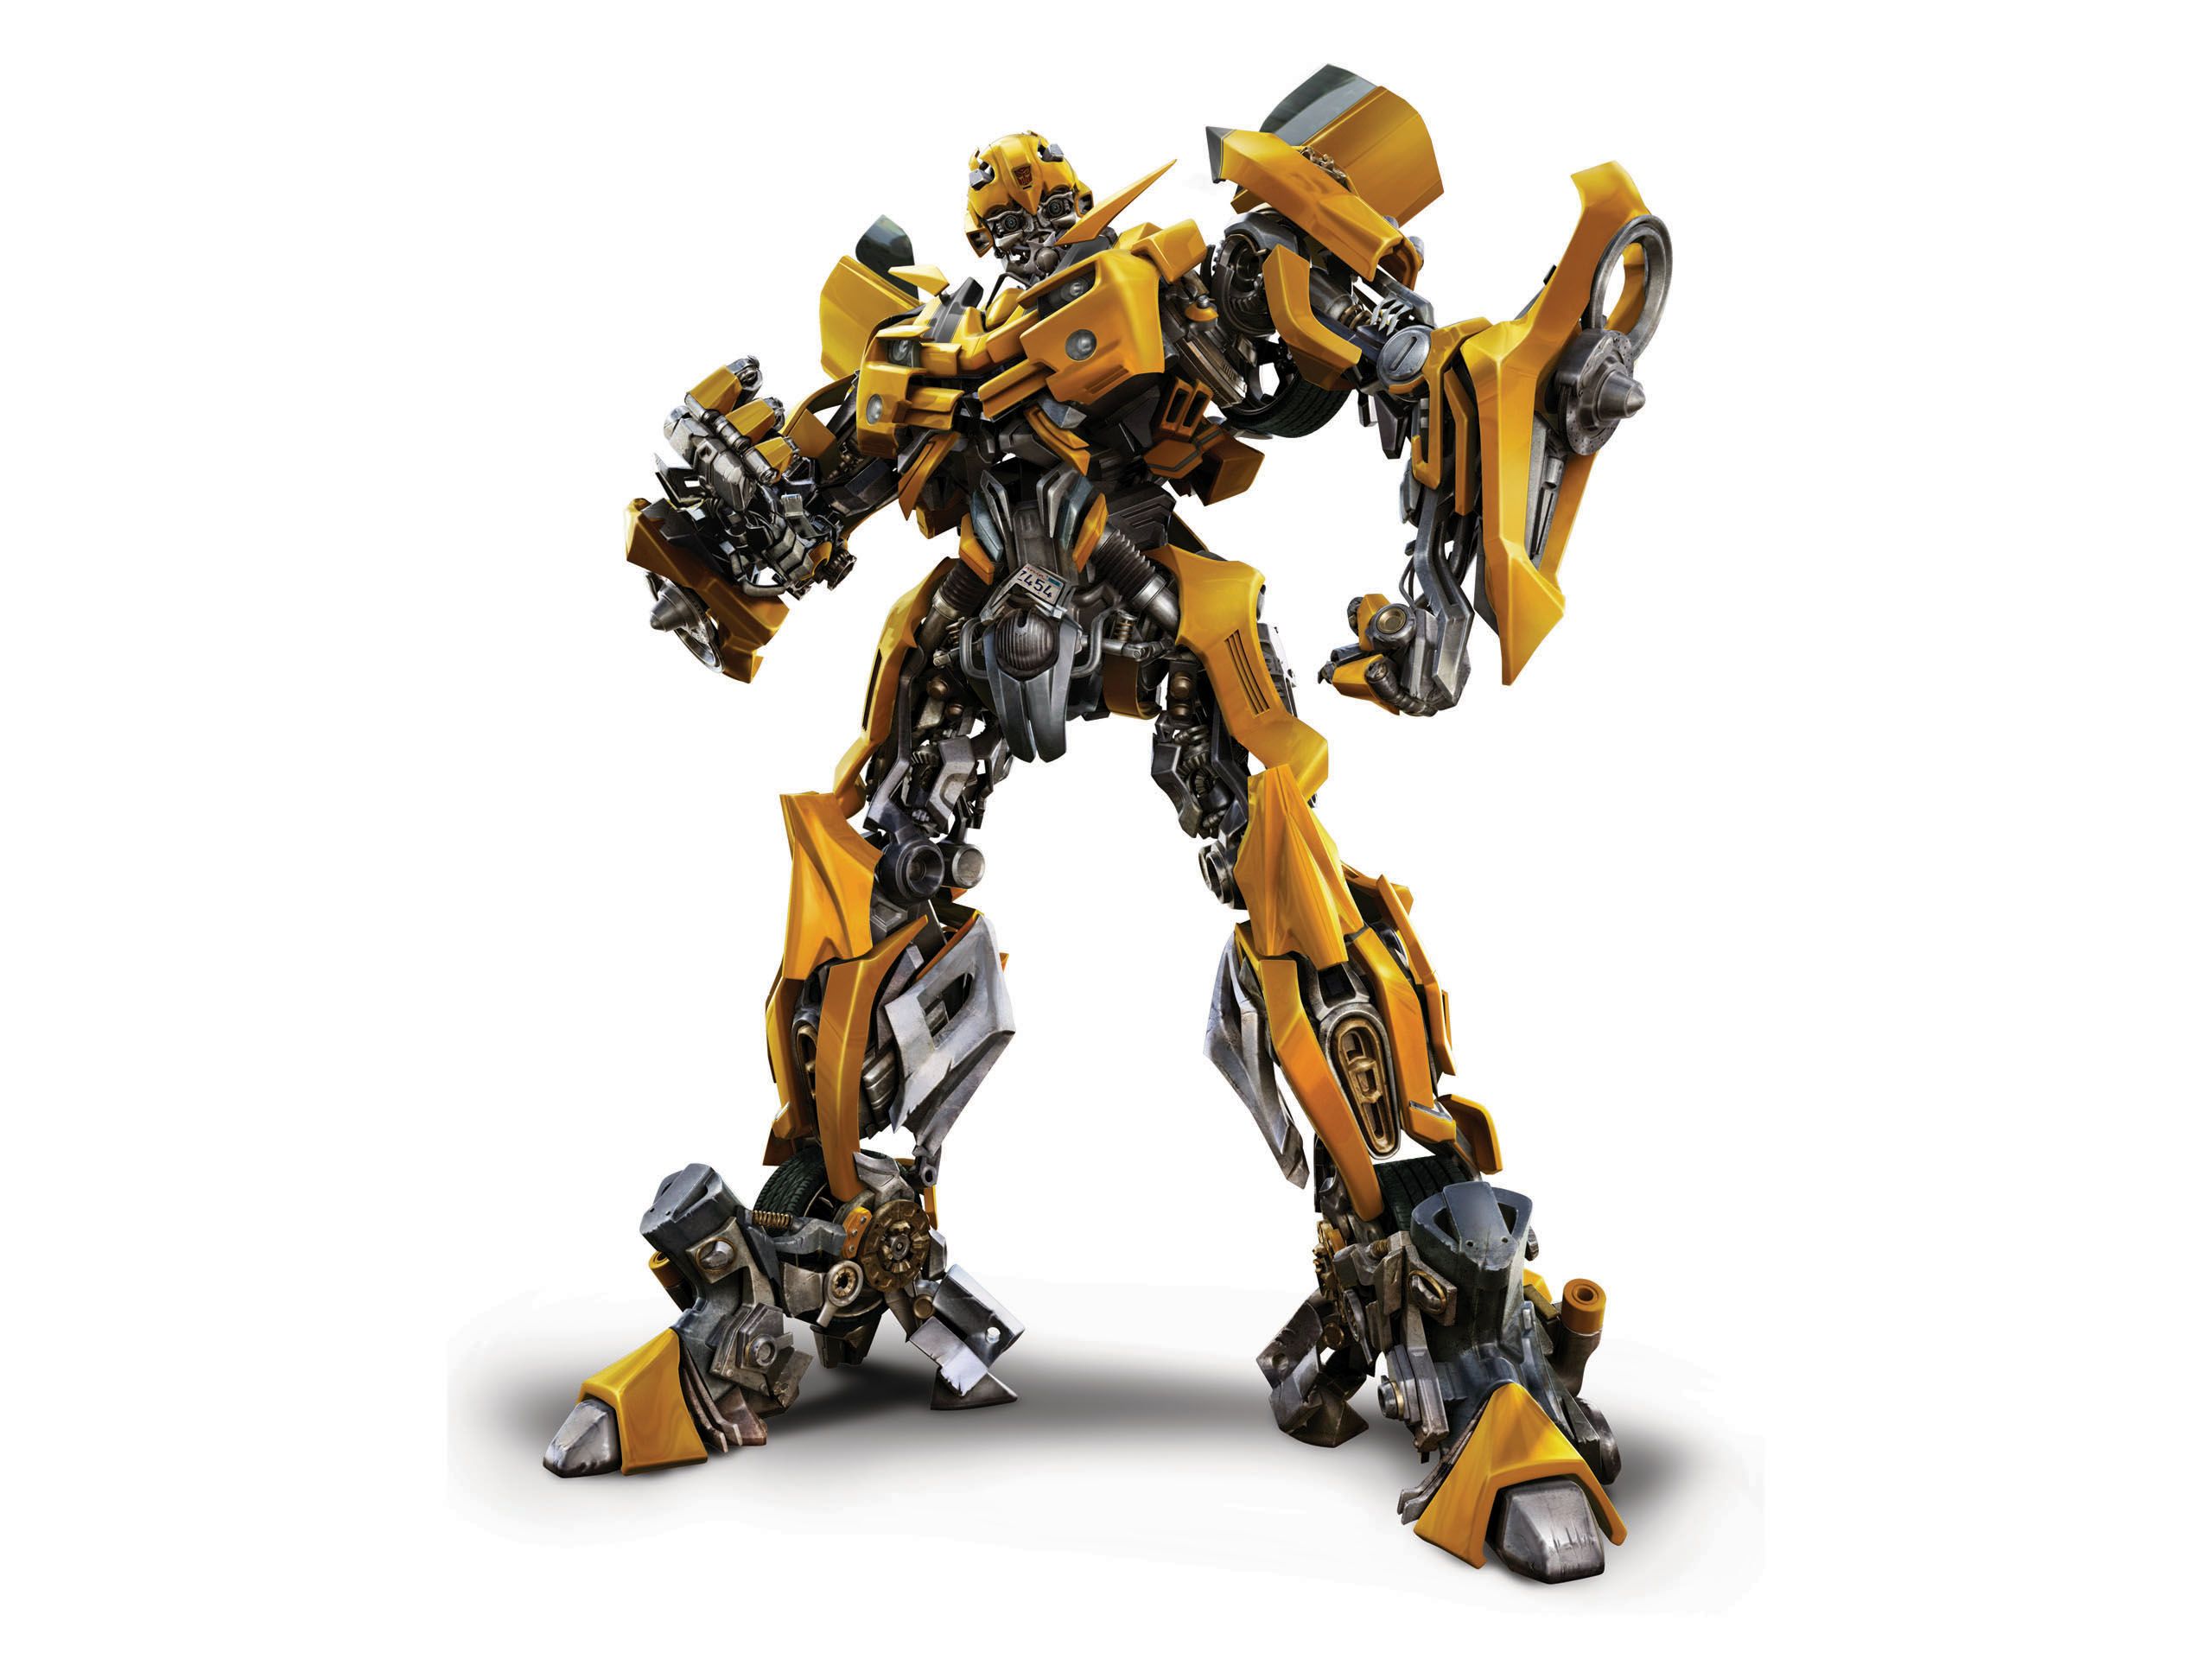 Transformers 1 and 2 Wallpapers HD 2560 X 1920 - Photo 10 of 60 ...